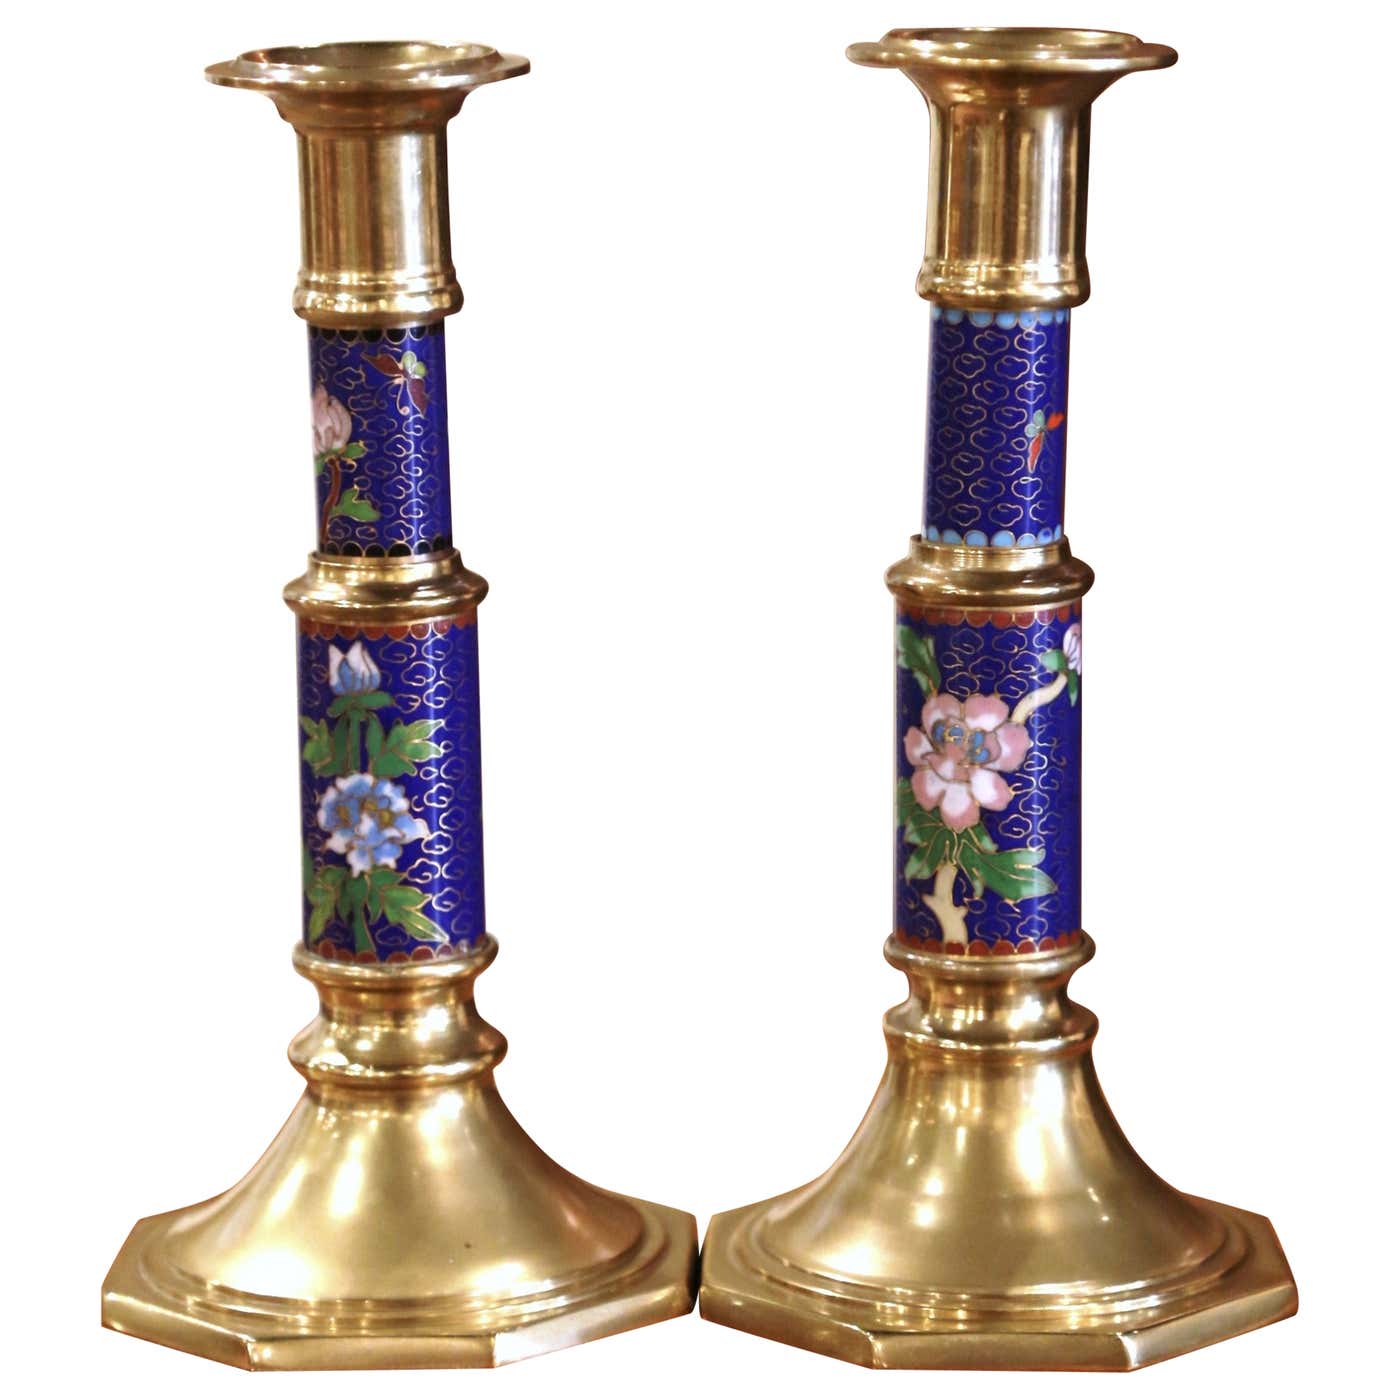 Pair of Vintage Brass Champleve Candle Holders with Floral & Leaf